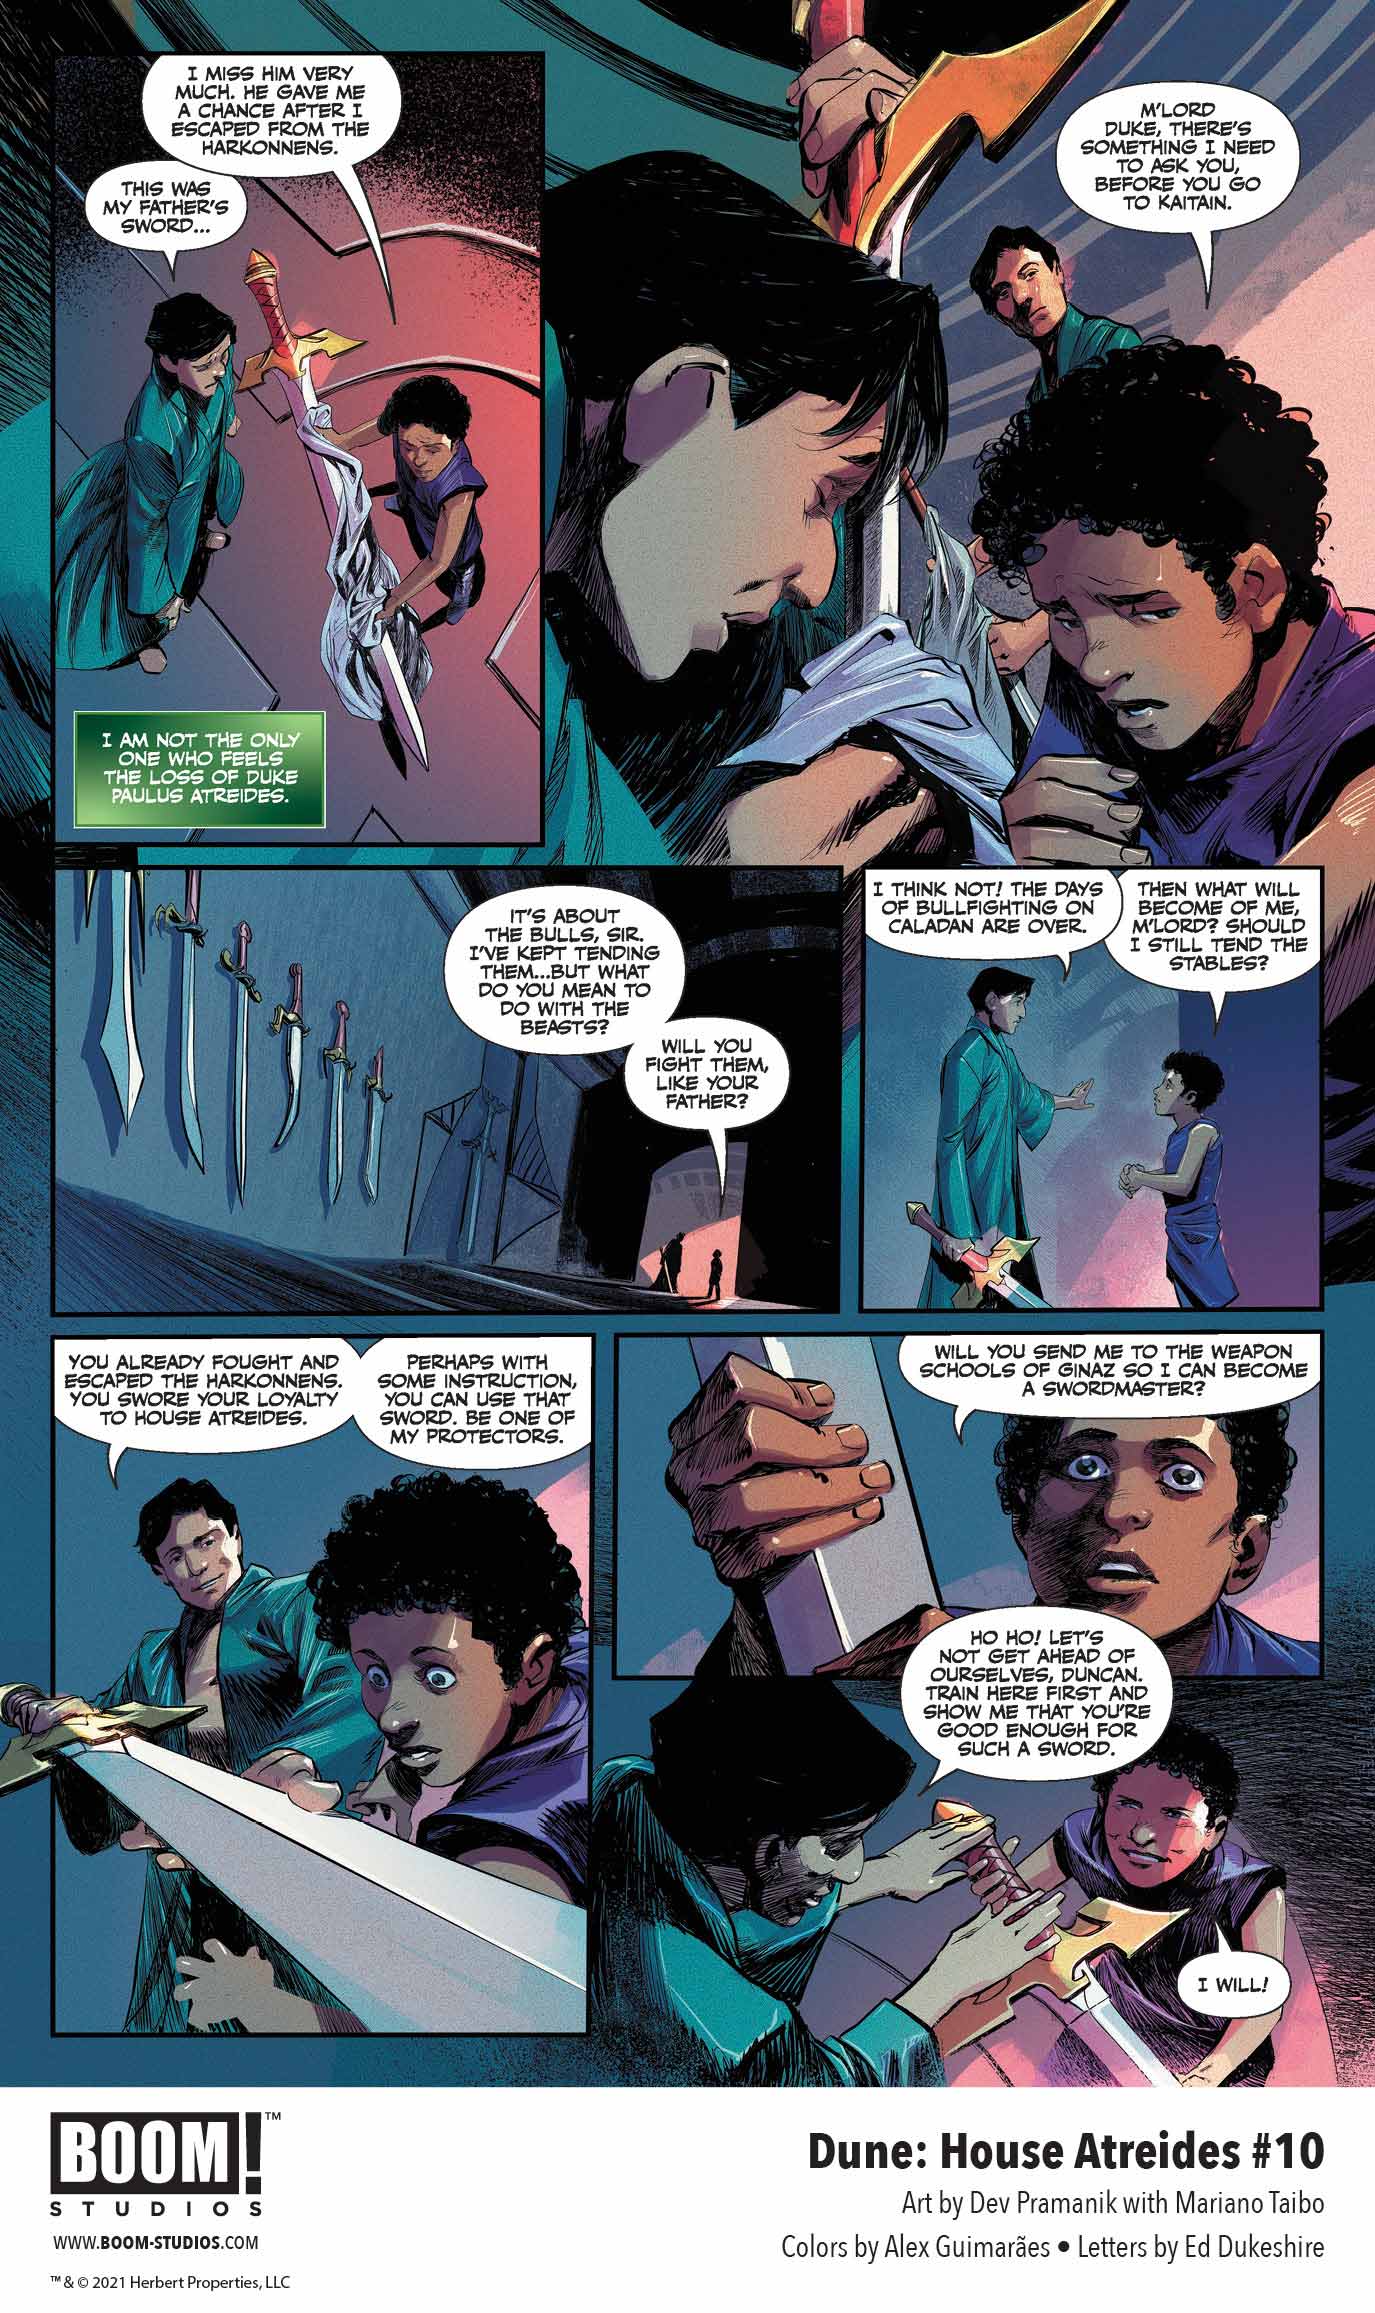 Dune: House Atreides comic series. Issue #10, preview page 4.